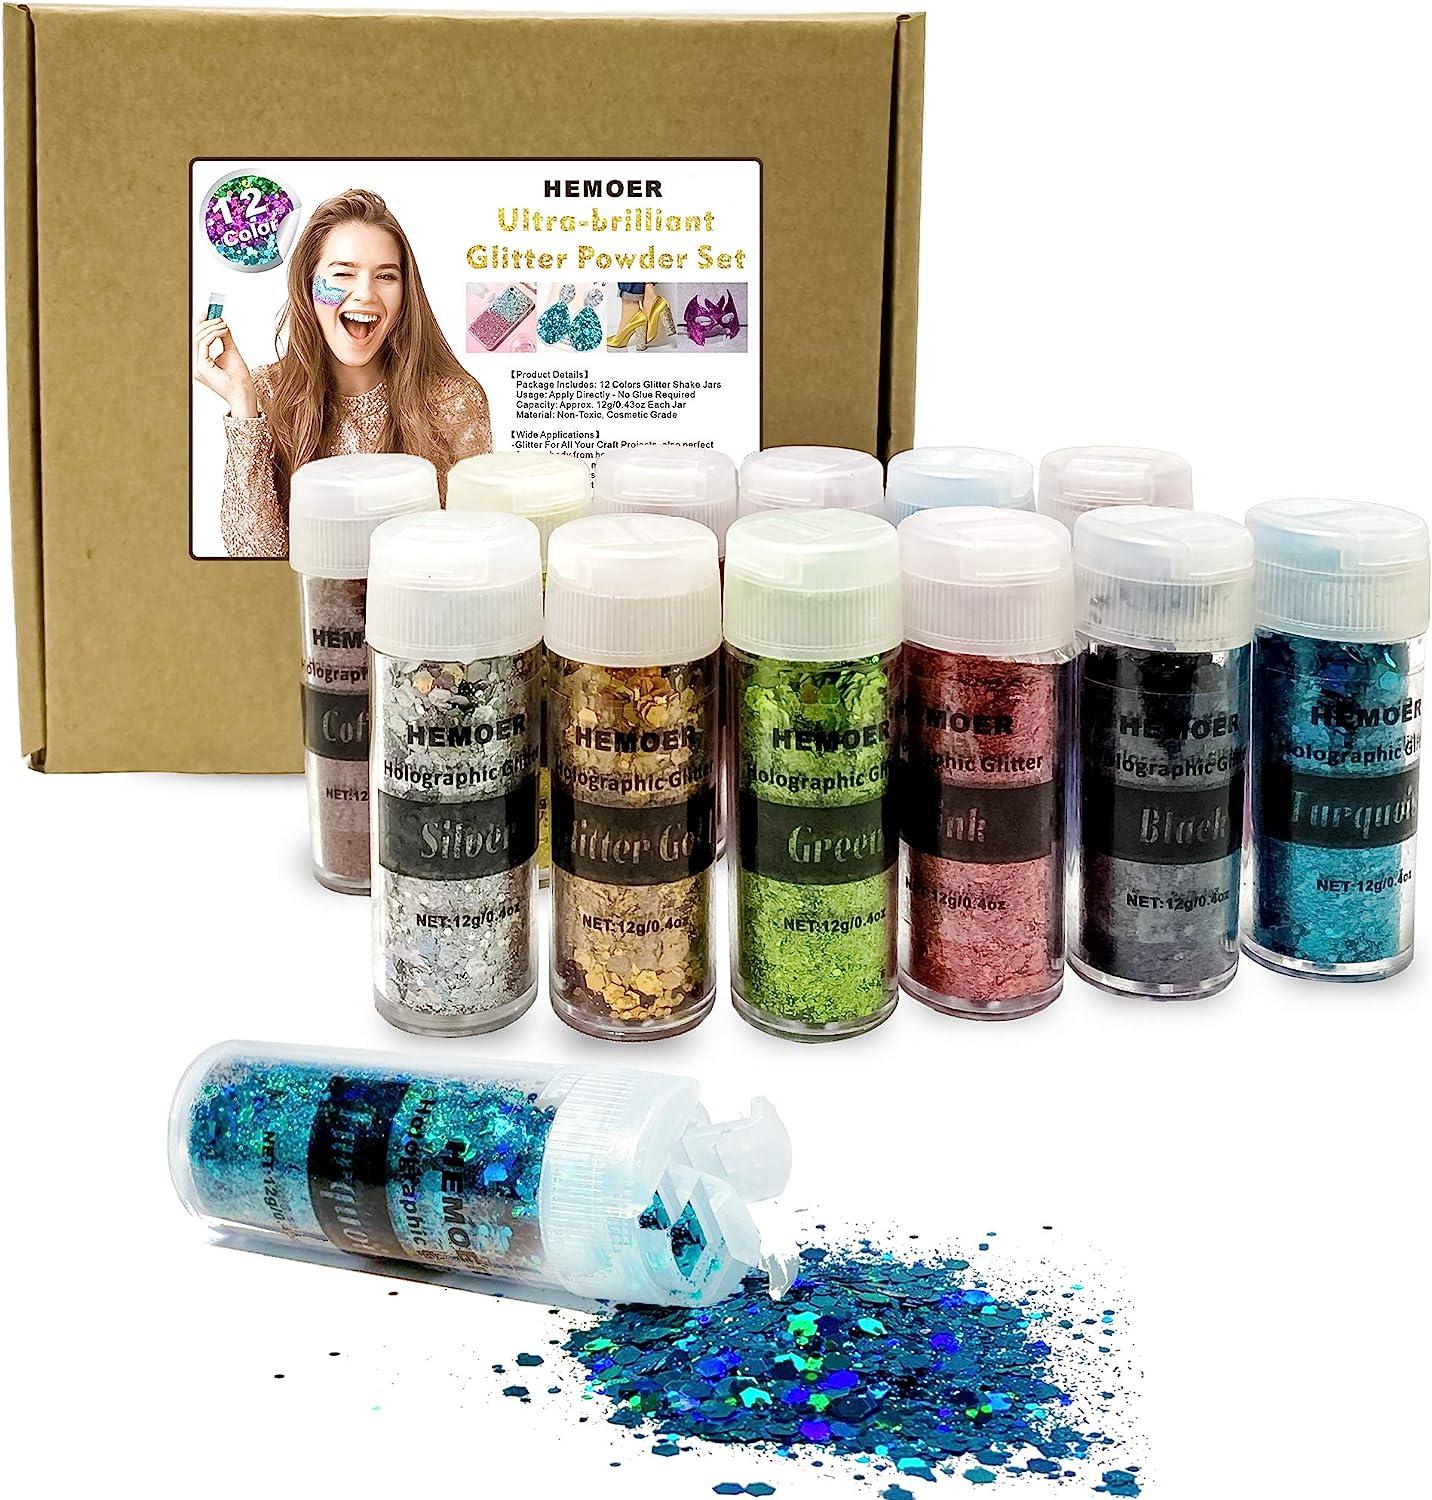 Bright Creations Blue Fine Holographic Glitter For Slime, Resin